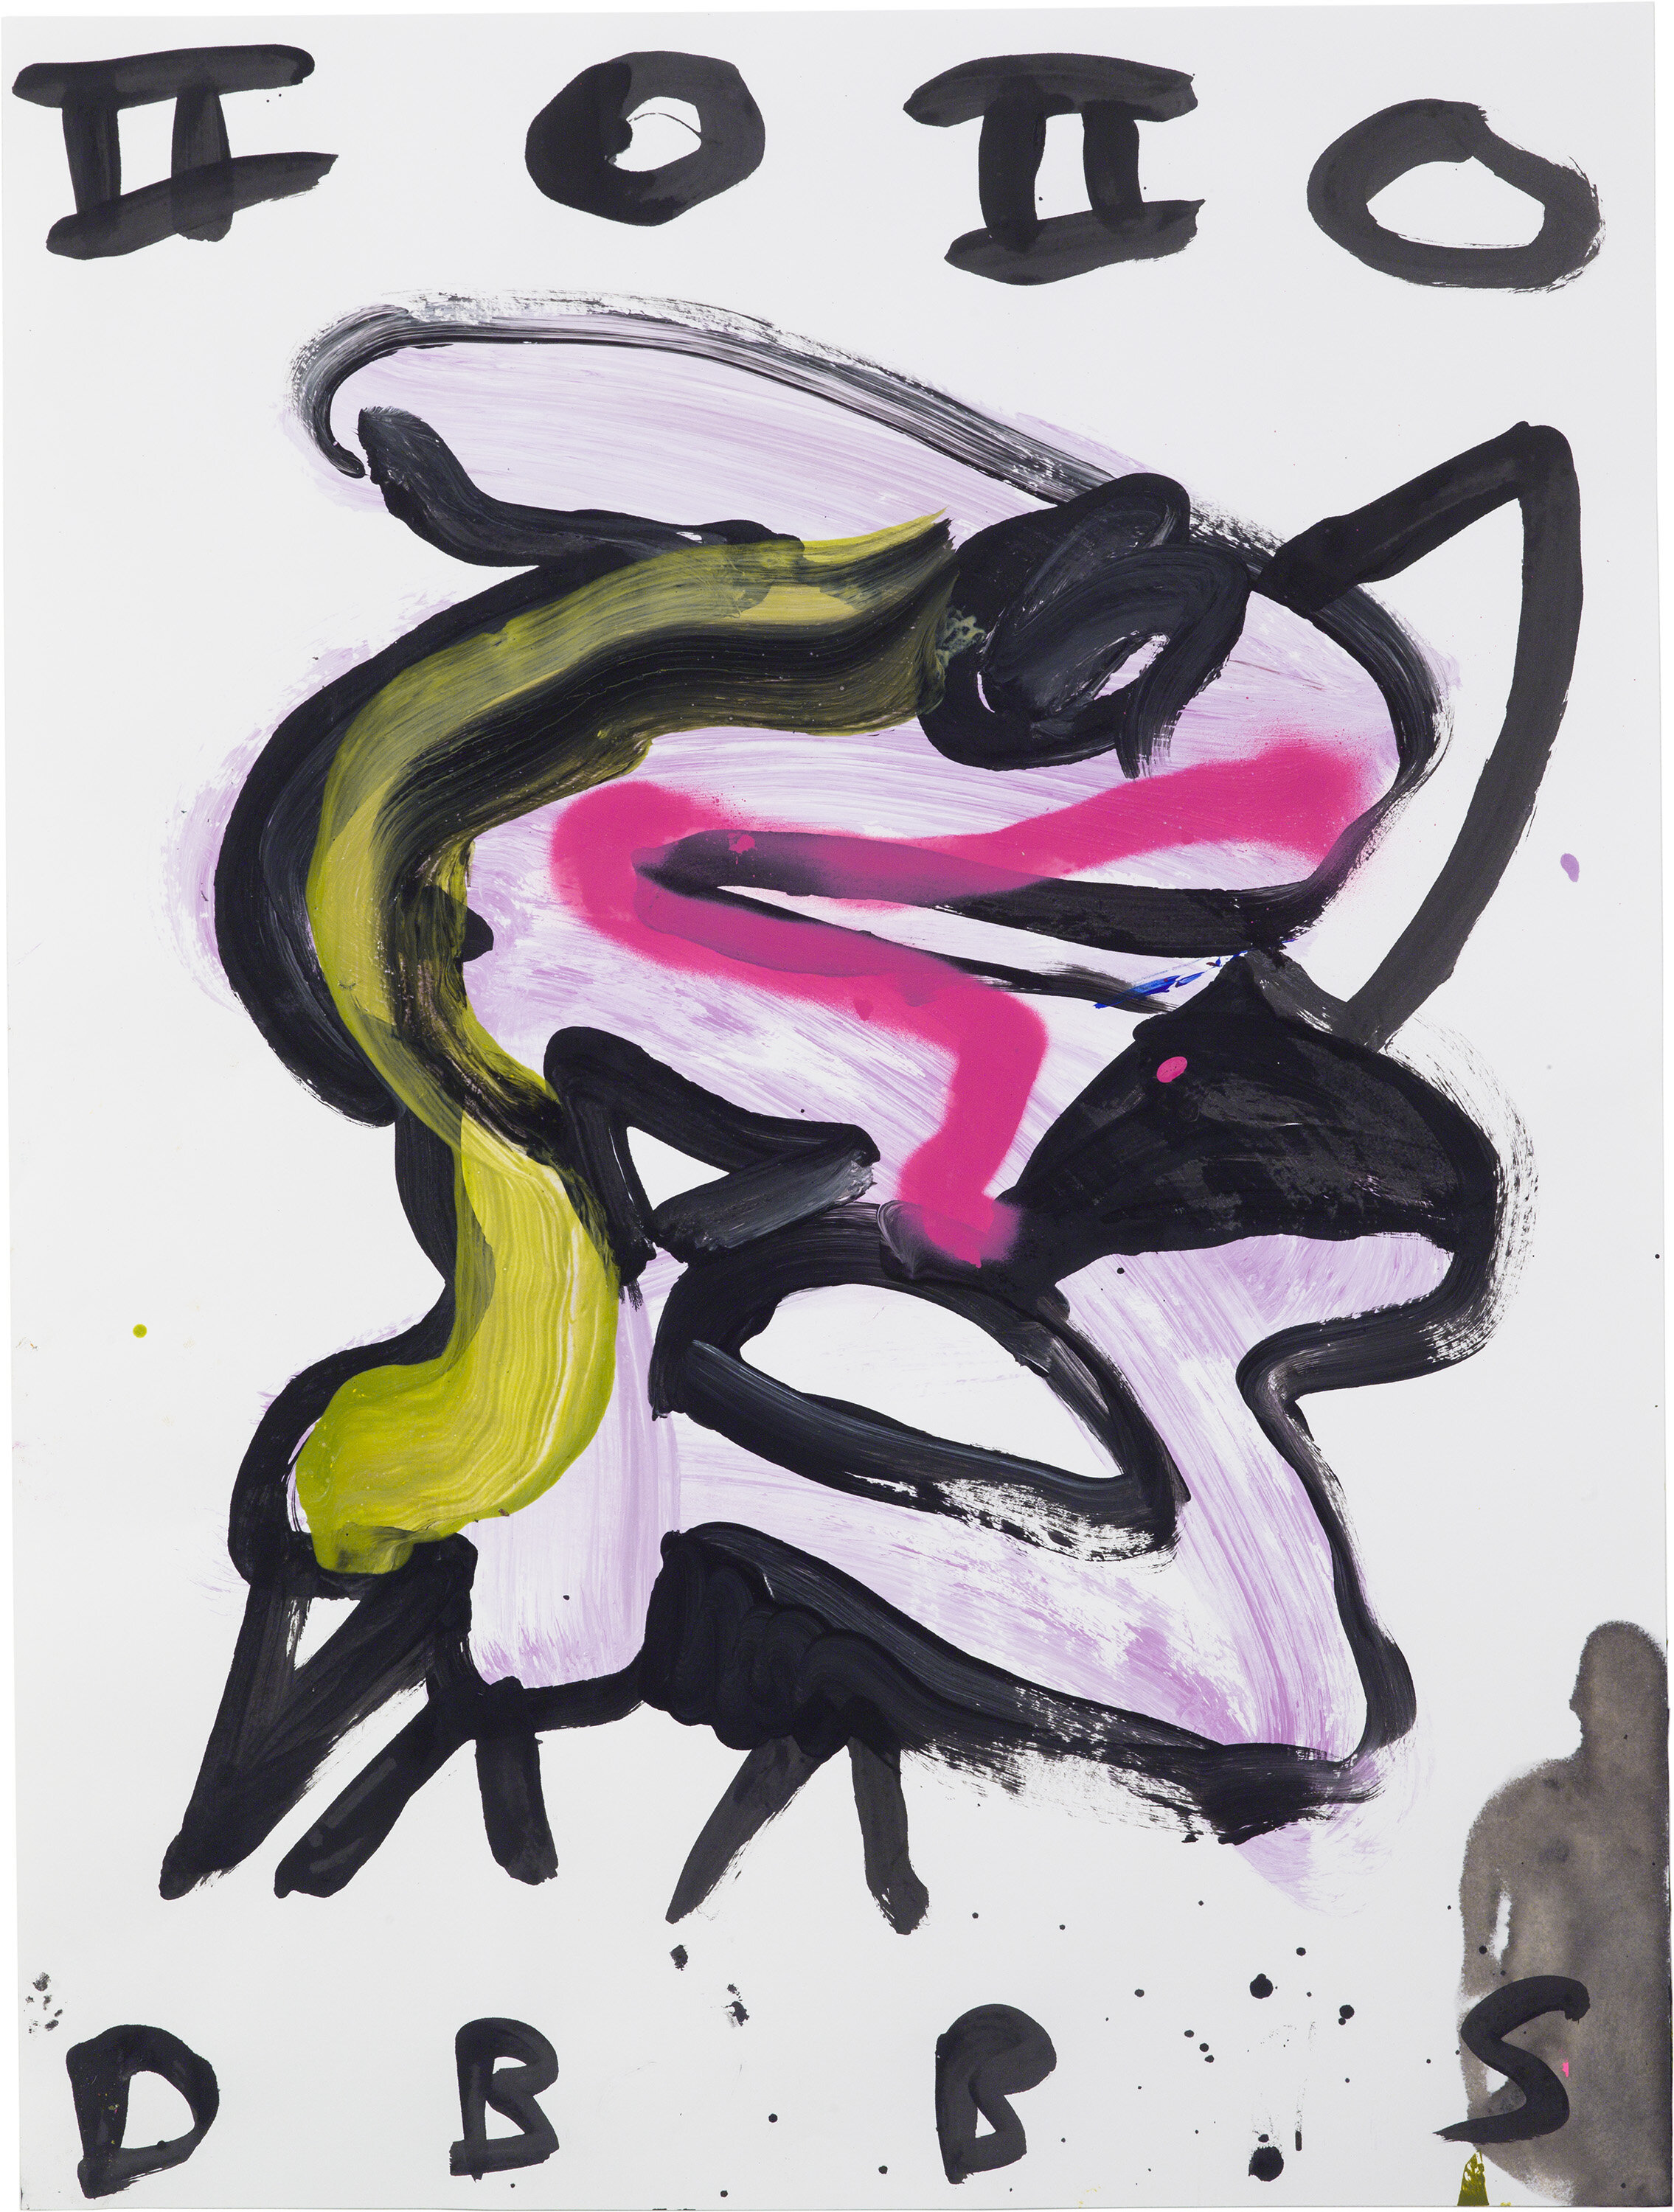  Drew Beattie and Ben Shepard   DBBS-DRW-2019-389  2019  acrylic and spray paint on paper  24 x 18 inches 